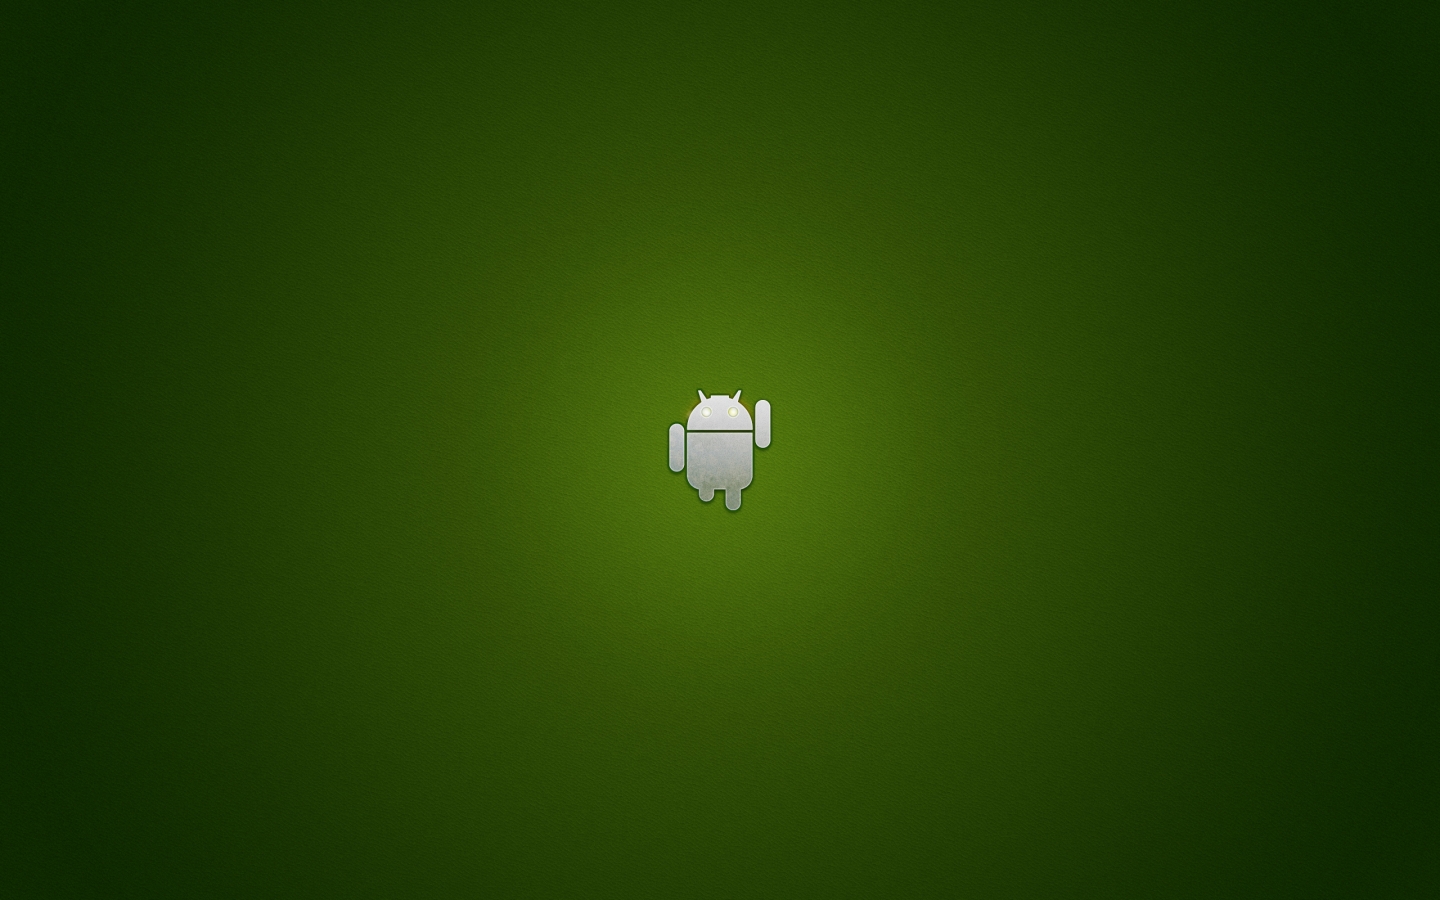 Just Android for 1440 x 900 widescreen resolution